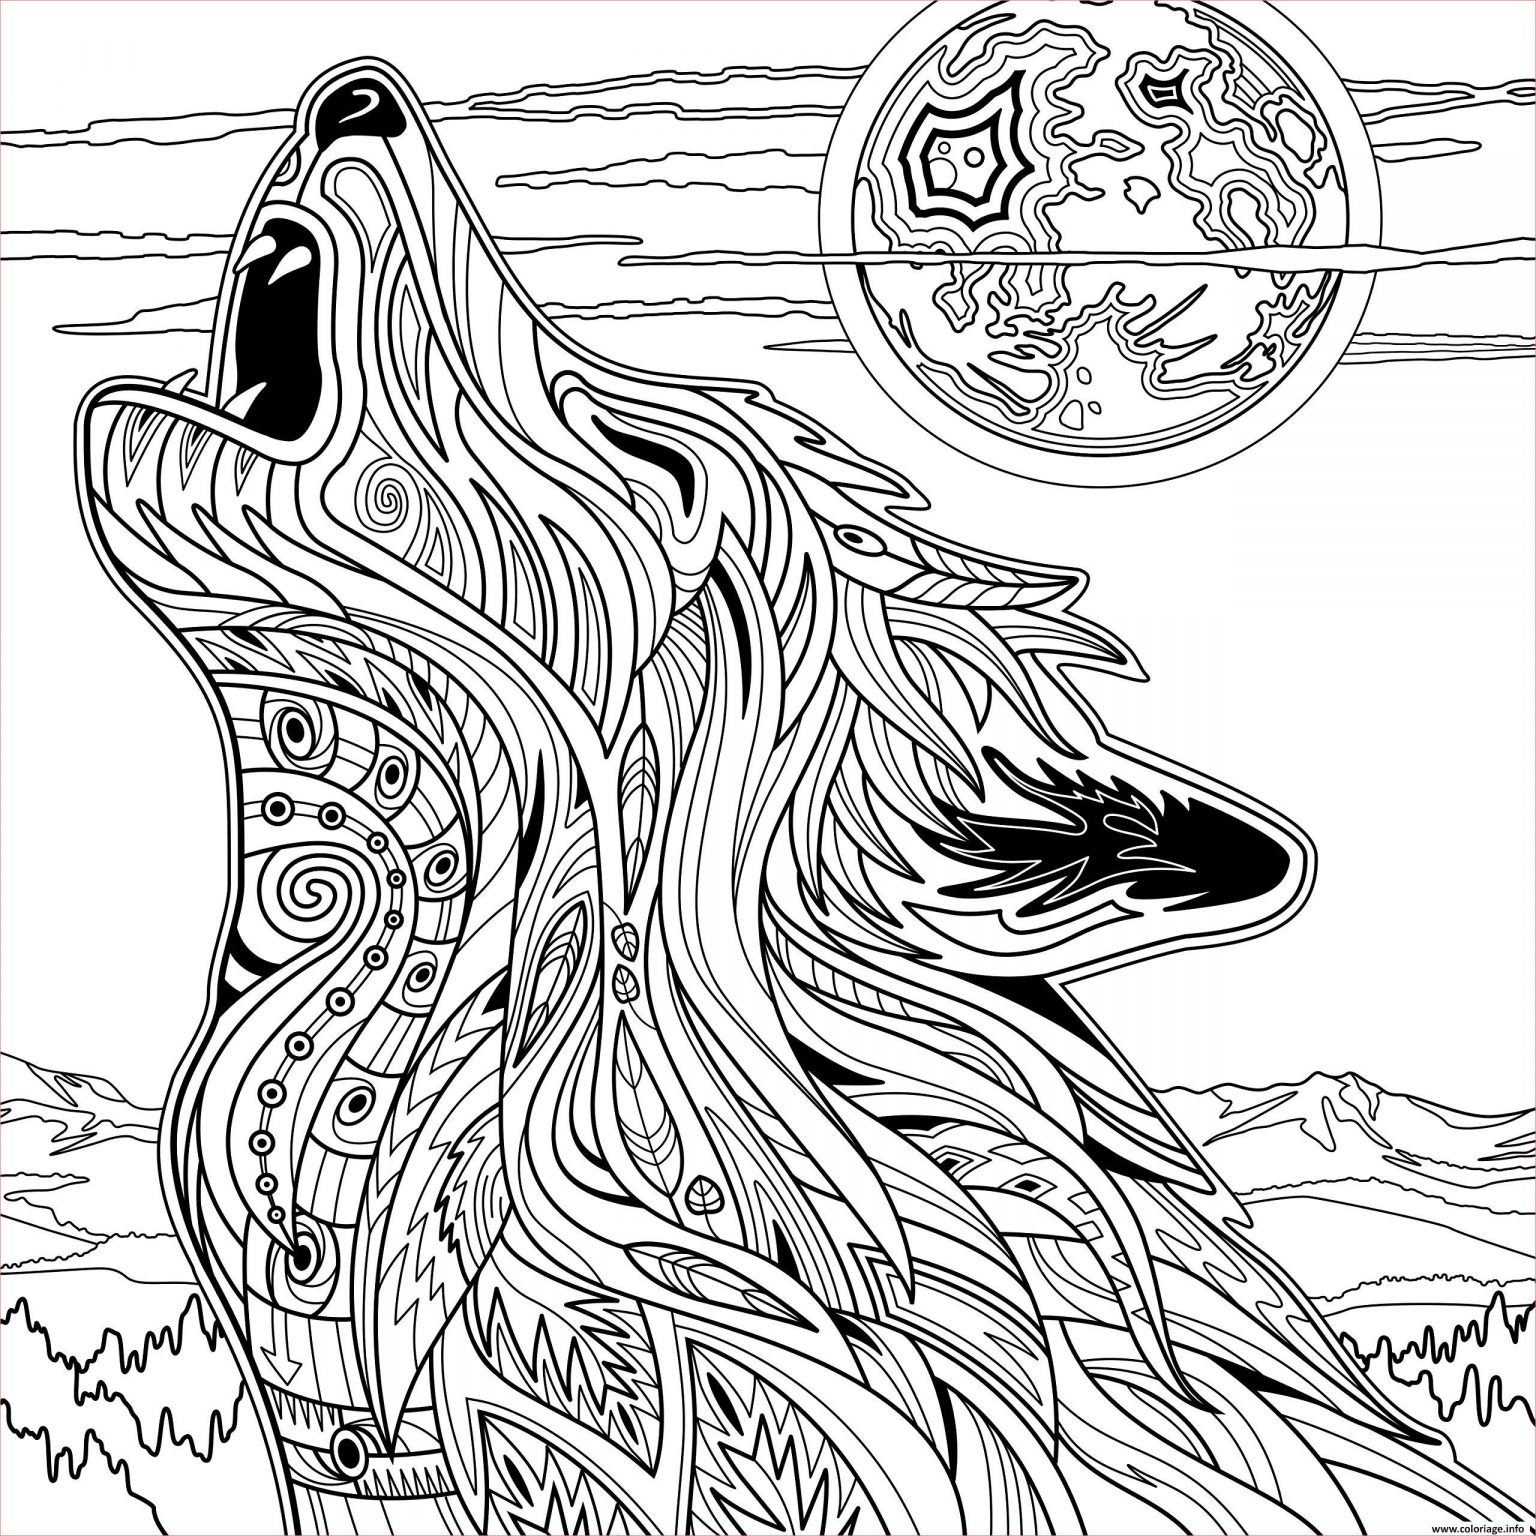 Coloriage Animaux Adulte Nice Coloriage Adulte Loup Animaux Yellowstone National Park Dessin